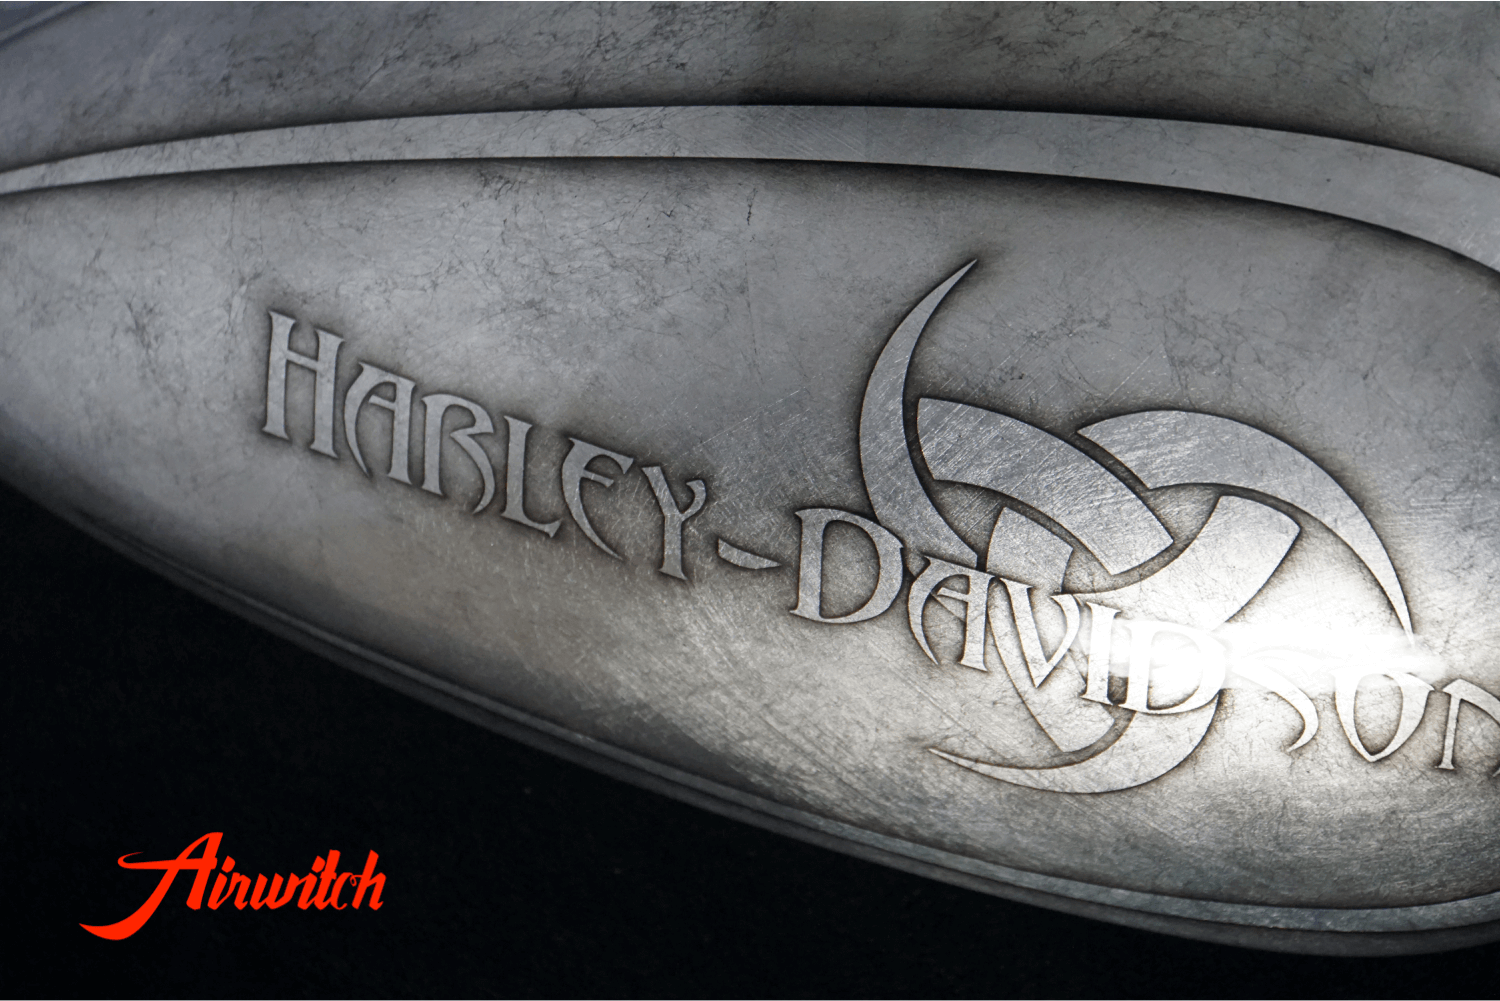 Custom Paint Harley Davidson Breakout Viking with Odin, Silver leaf, celtic knot, Airbrush Tank, Airwitch